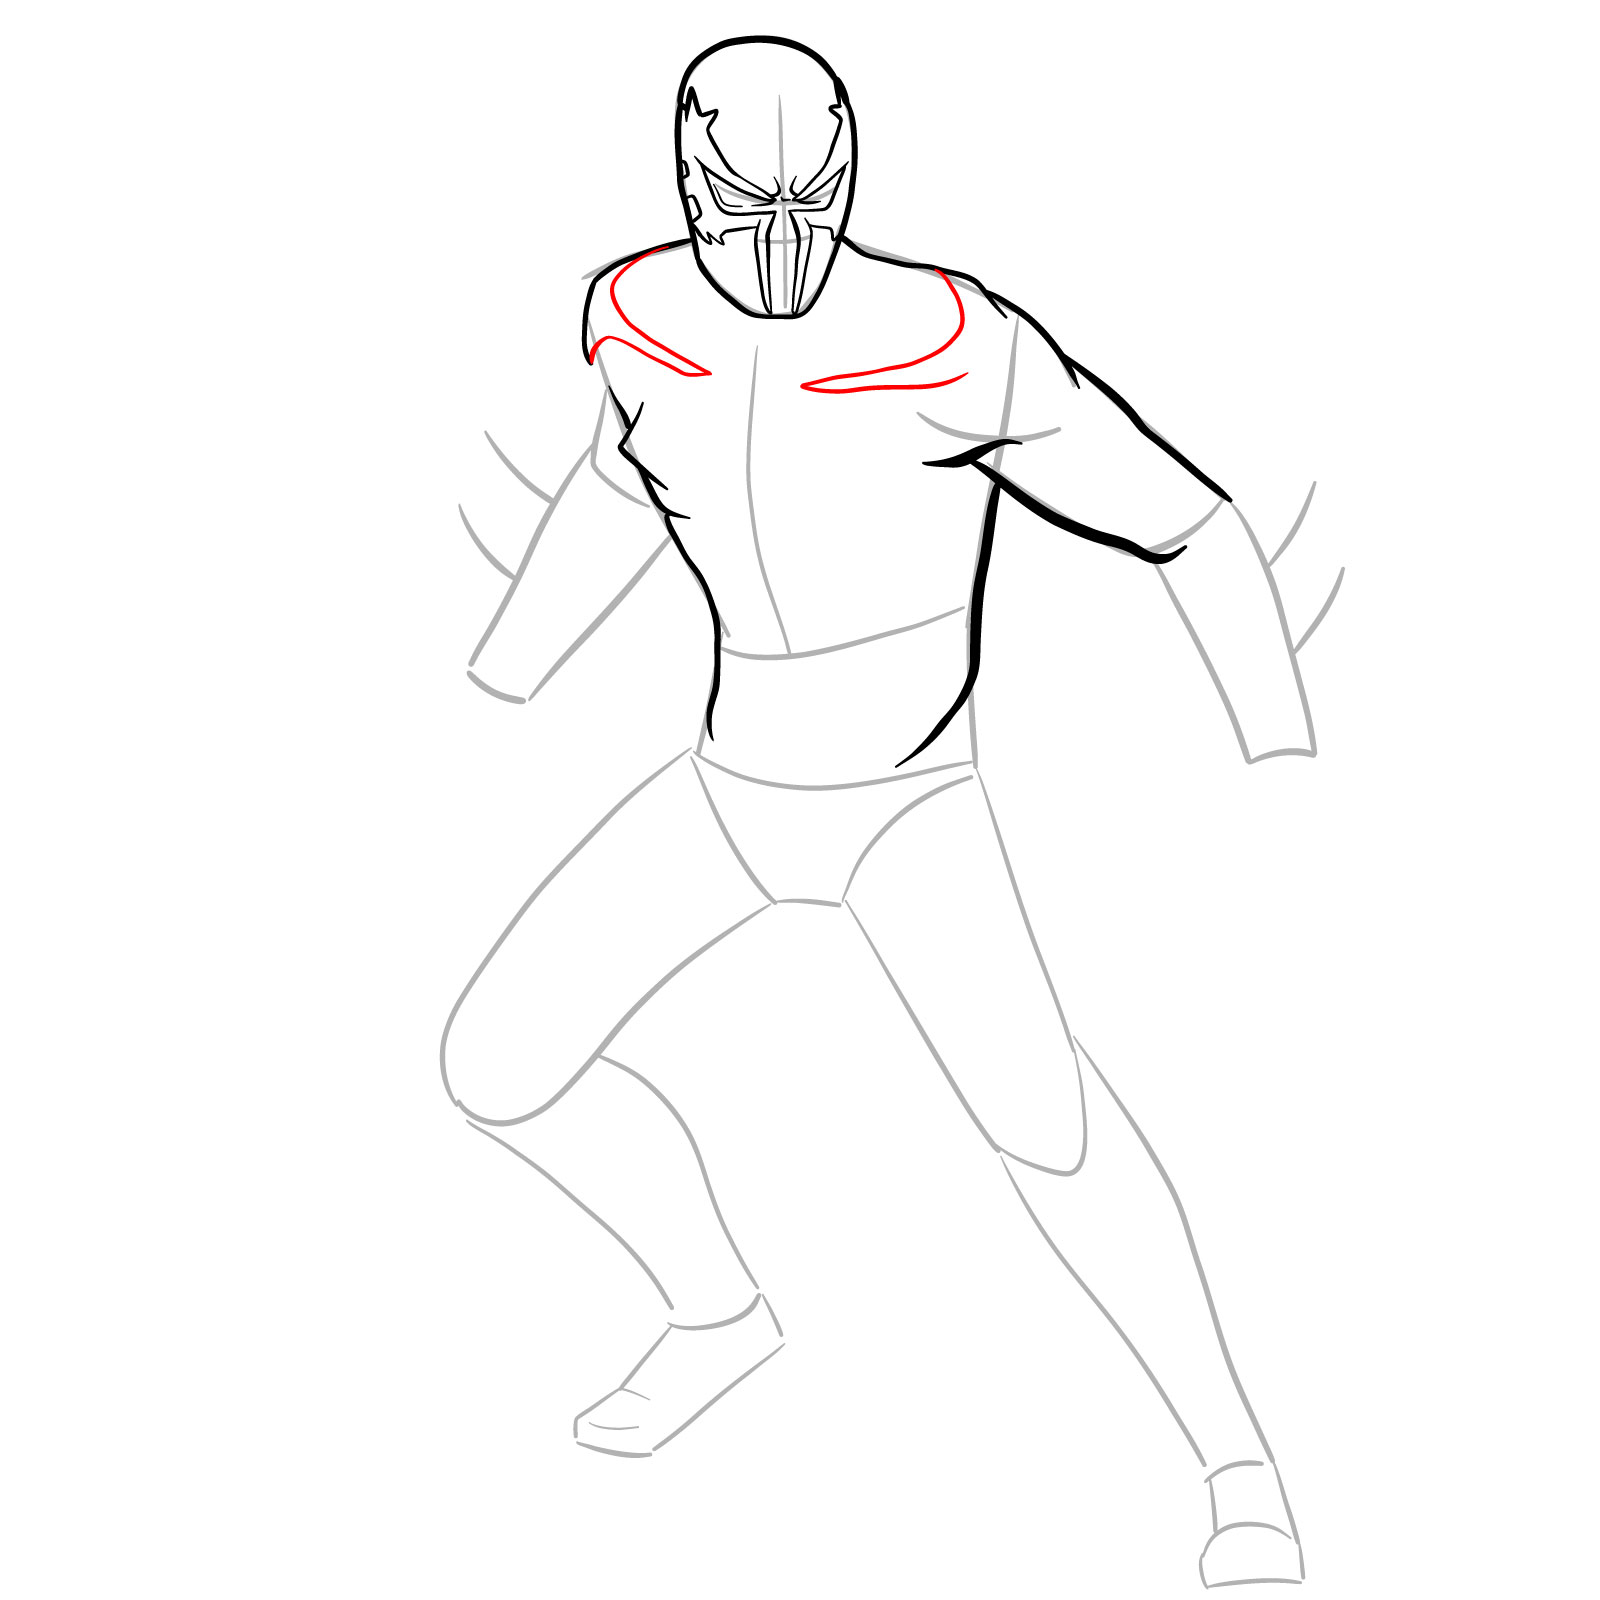 How to draw Spider-Man 2099 - step 14